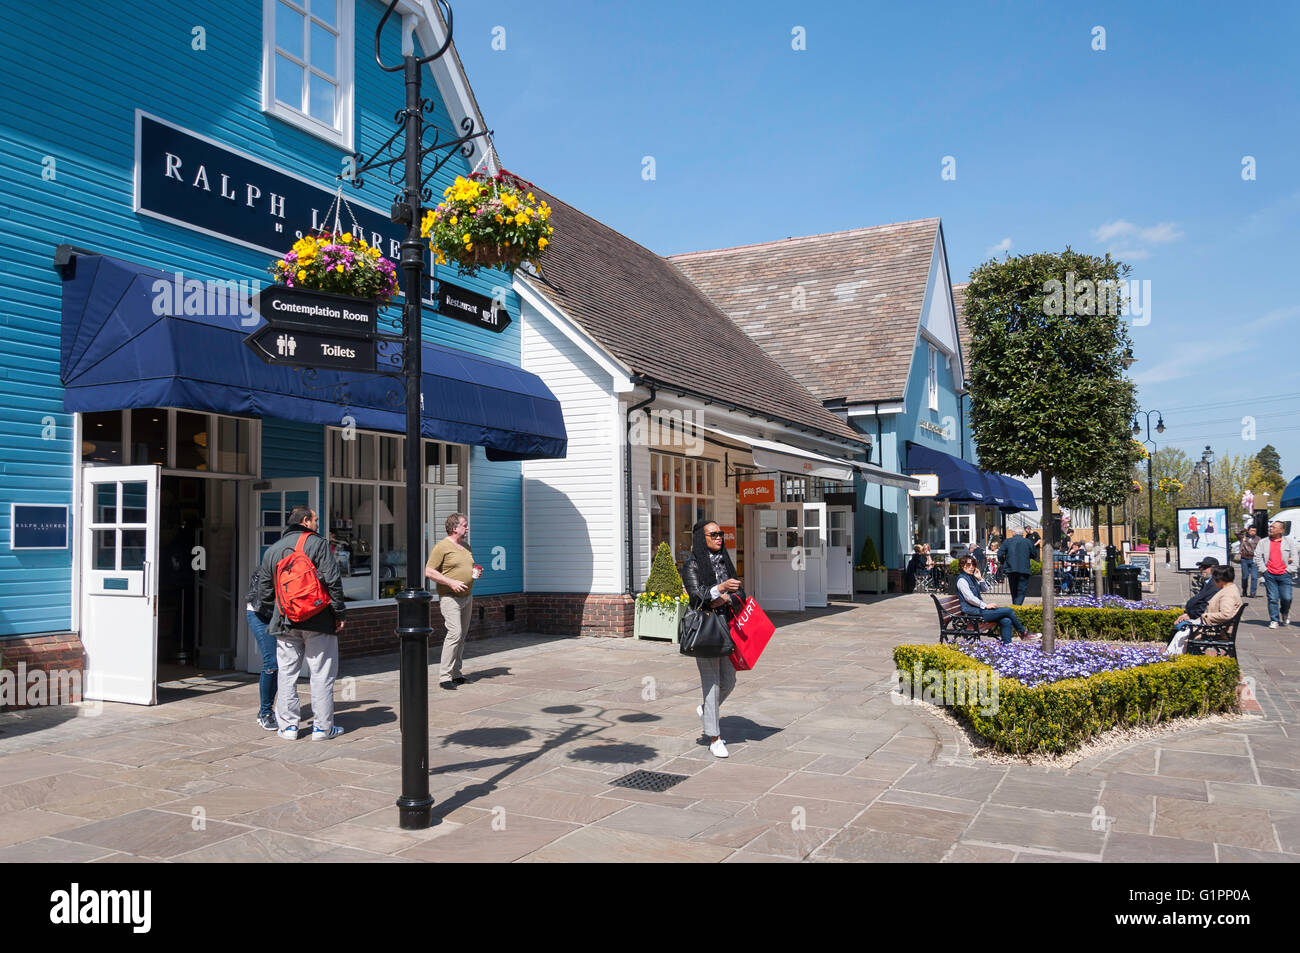 Ralph lauren outlet hi-res stock photography and images - Alamy